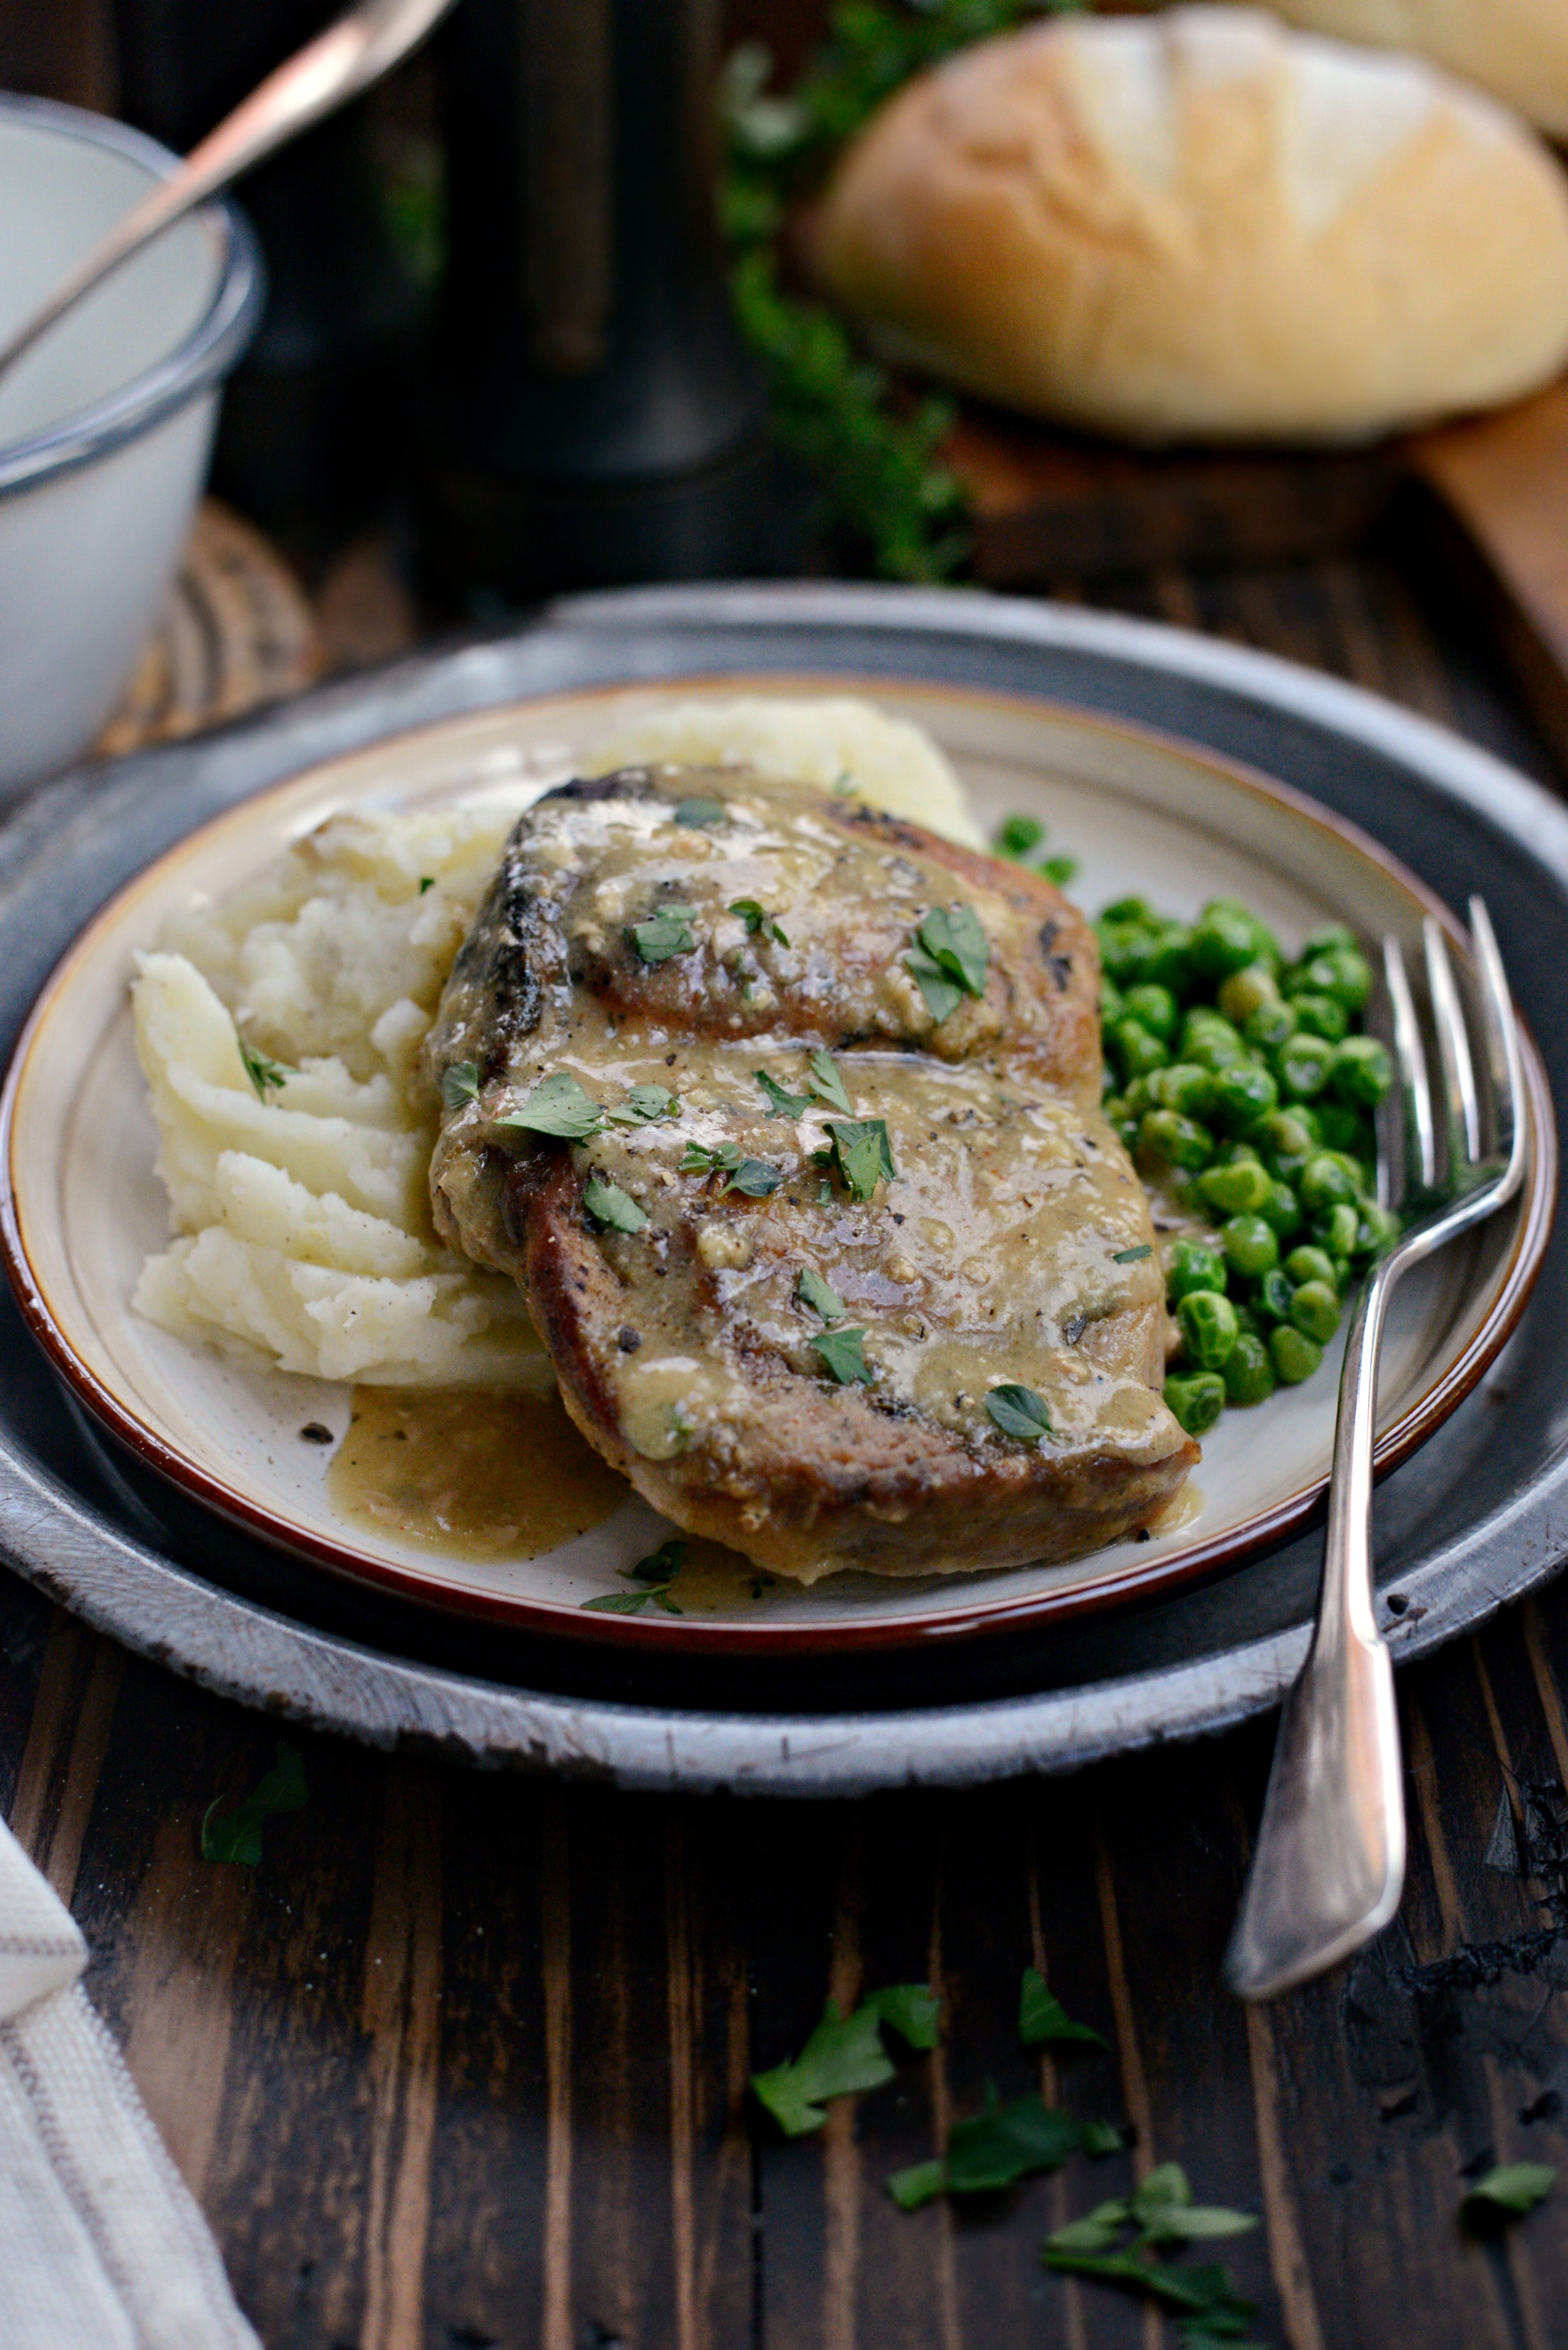 https://www.simplyscratch.com/wp-content/uploads/2016/10/Slow-Cooker-Pork-Chops-with-Herb-Gravy-l-SimplyScratch.com-15.jpg